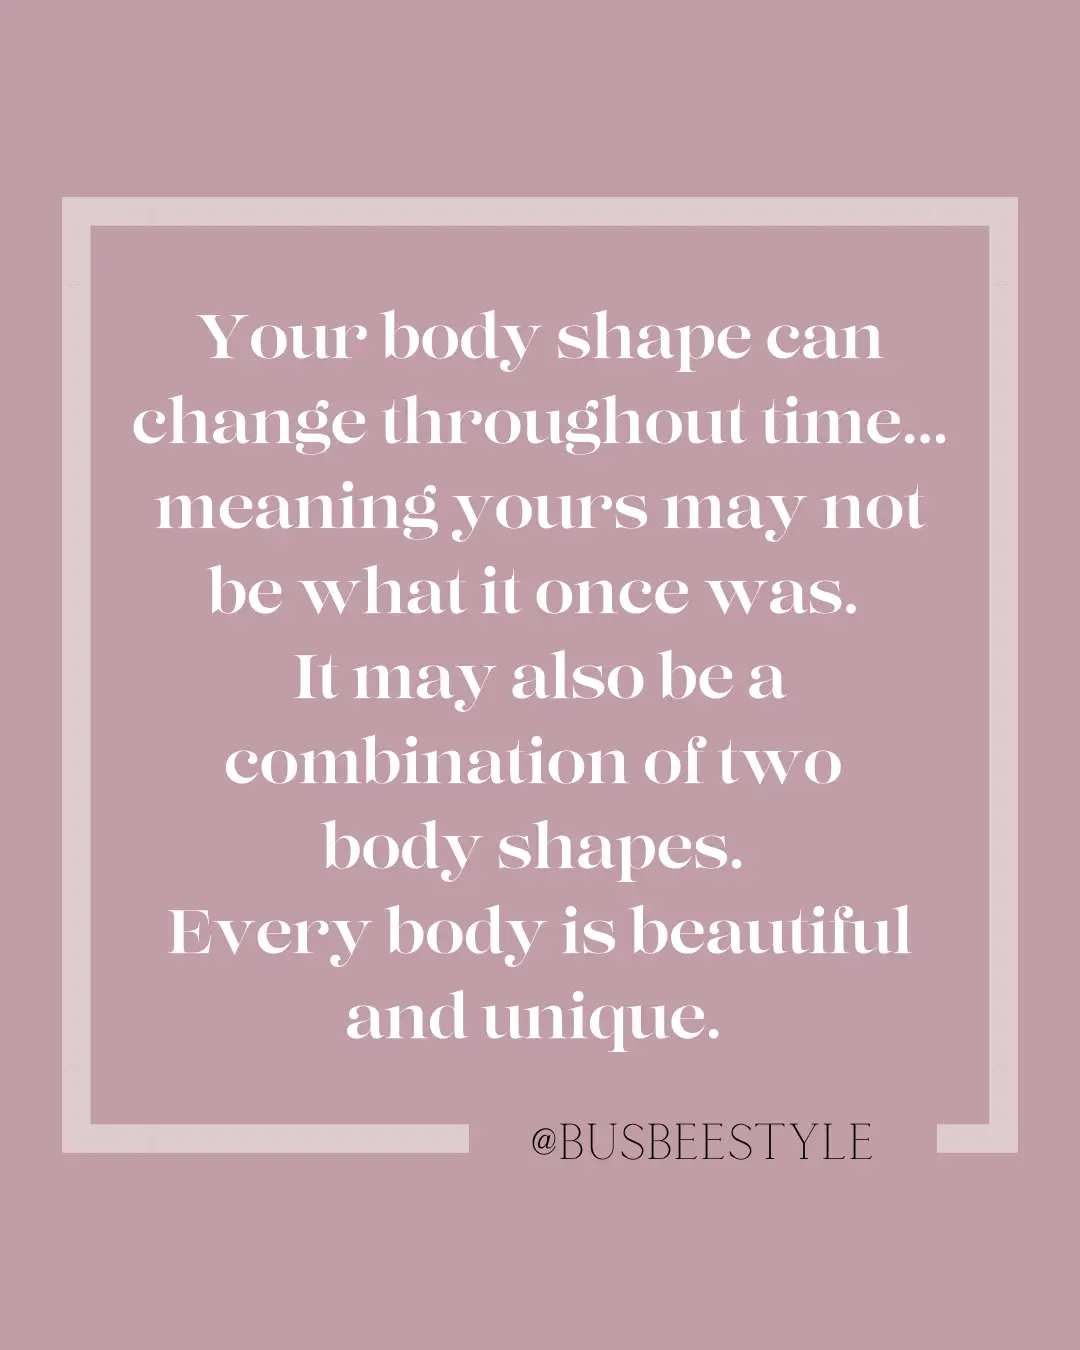 Find your body shape with these simple steps! 🙌